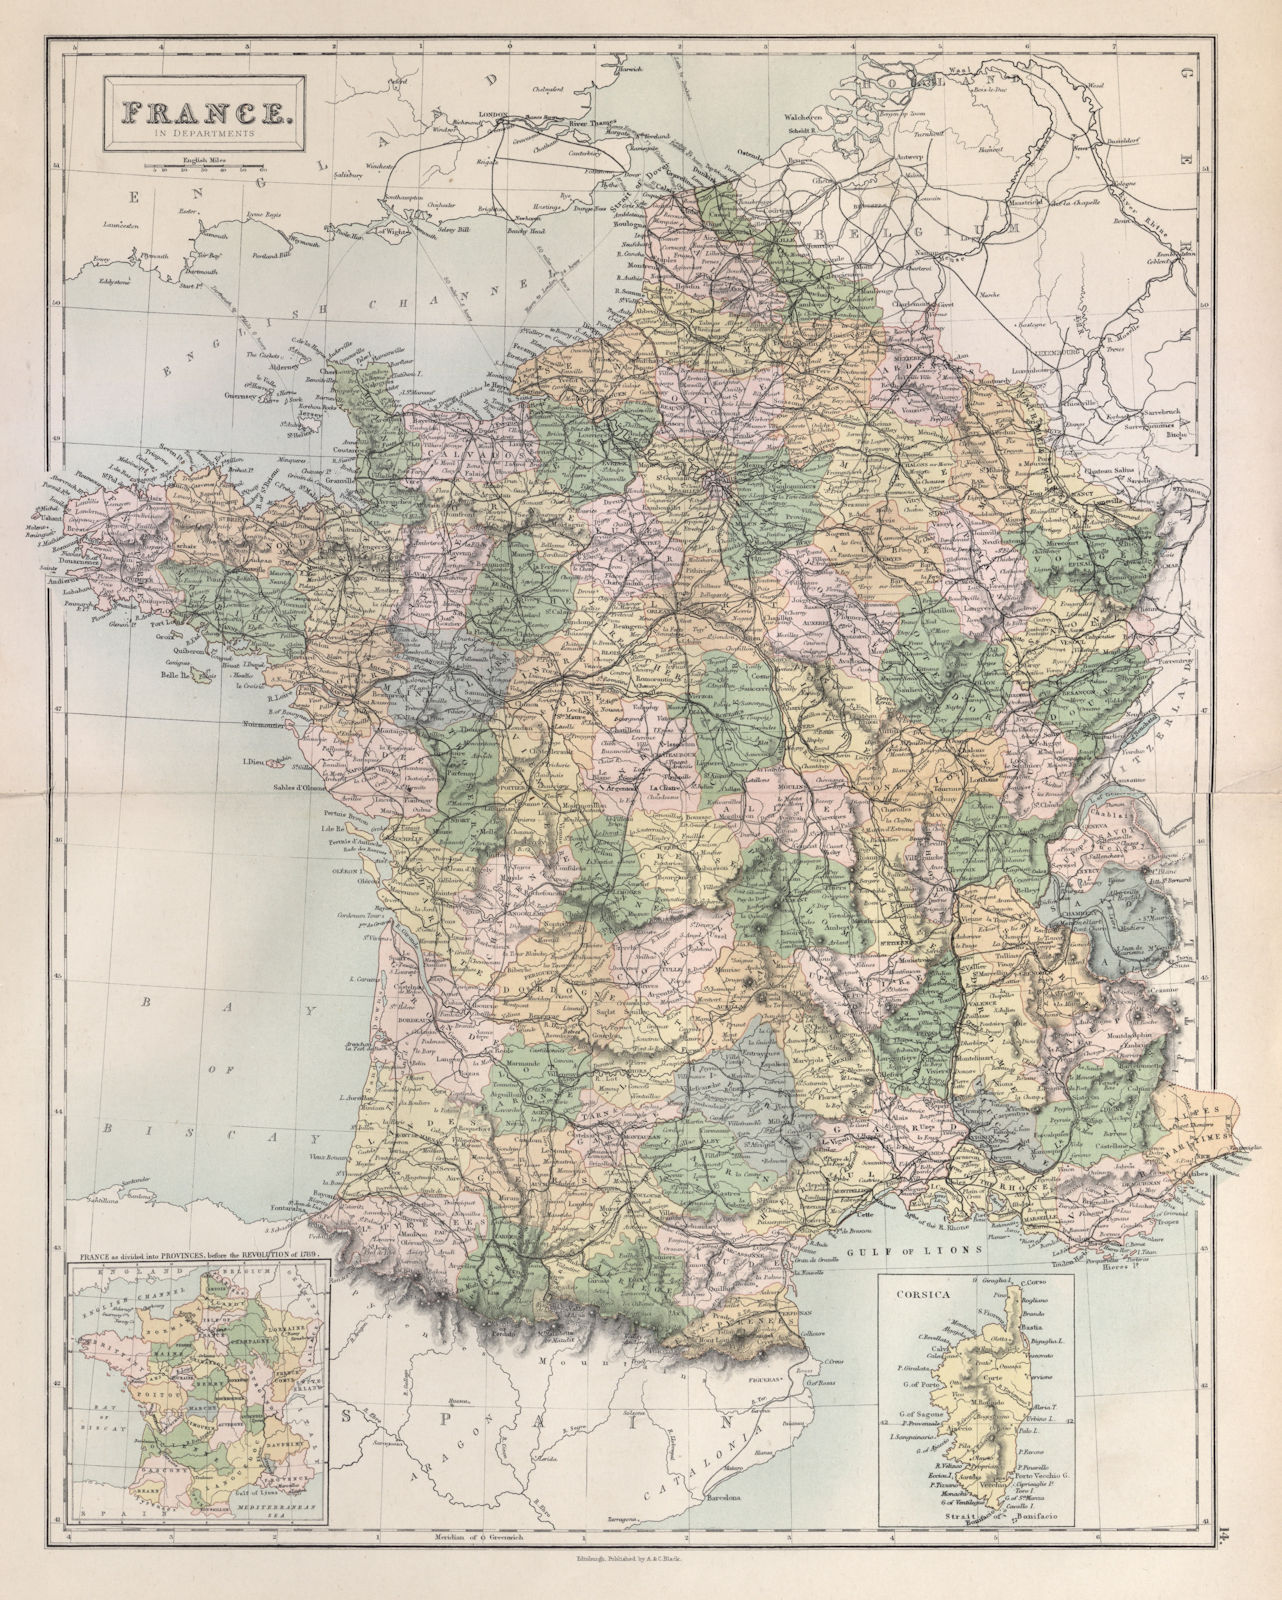 France without Alsace Lorraine. Departements. BARTHOLOMEW 1882 old antique map